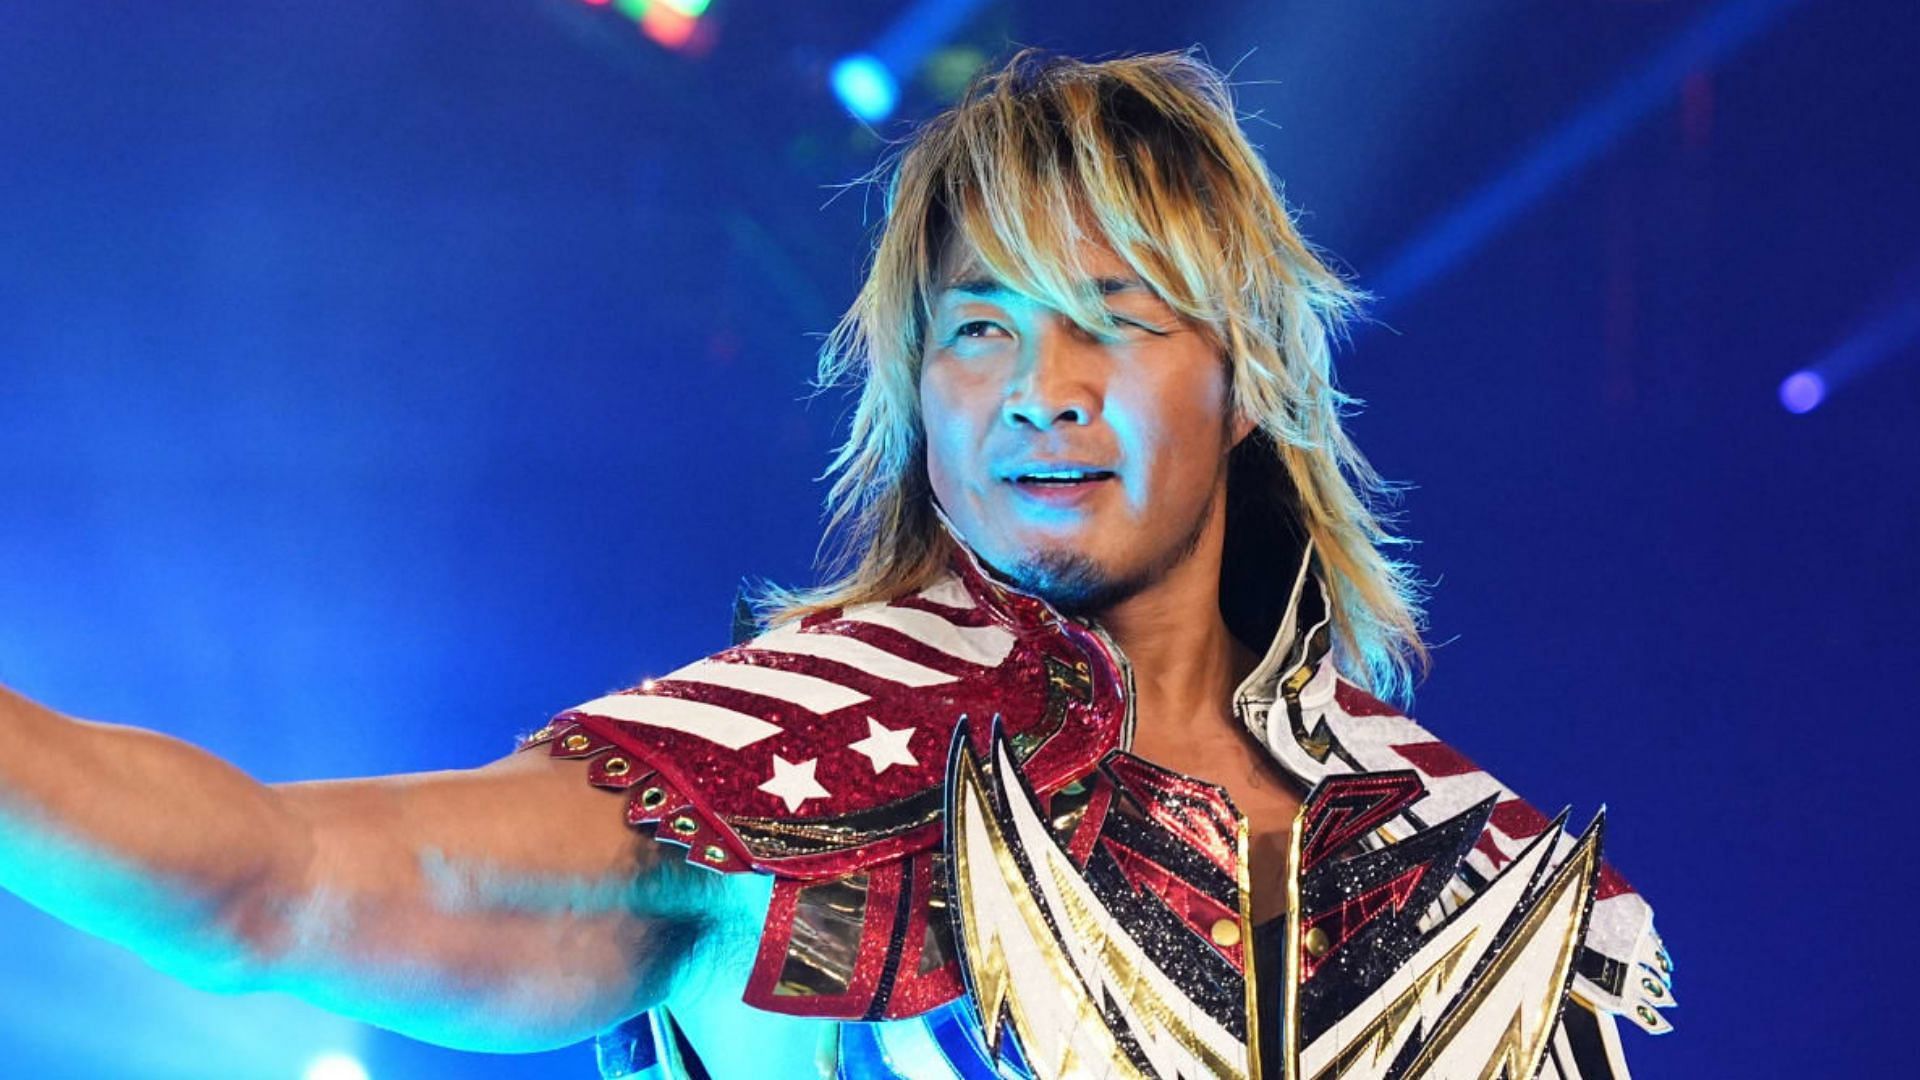 Could someone in AEW provide Tanahashi with a similar challenge?